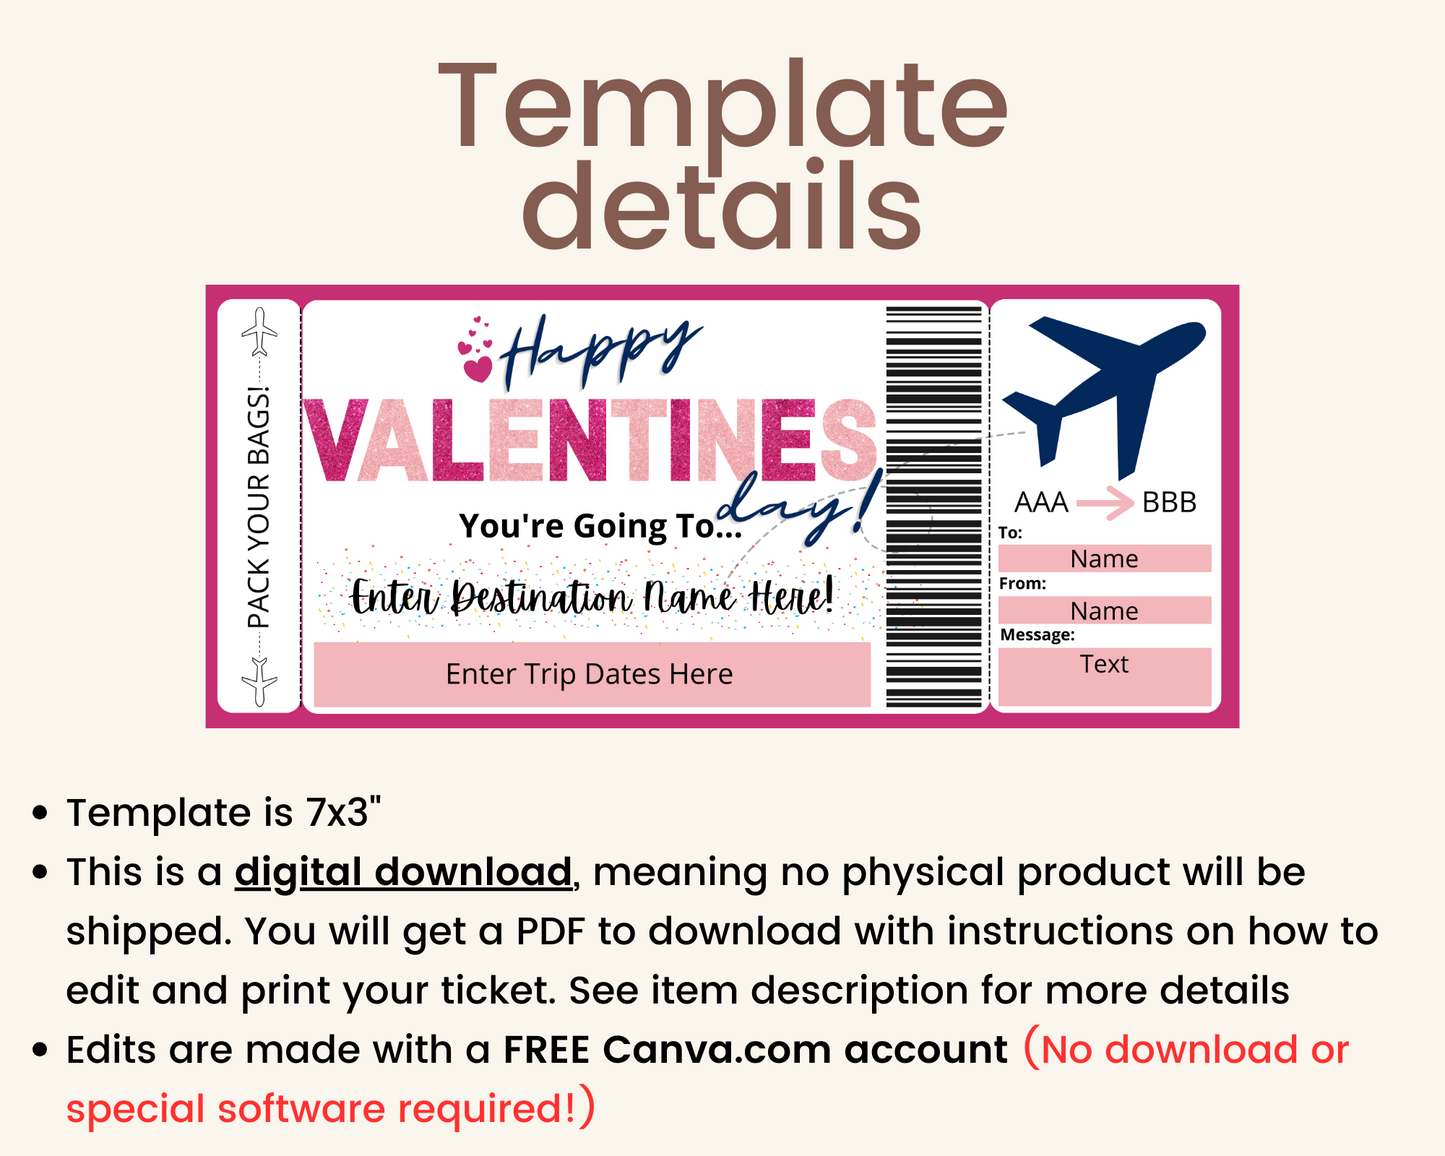 Valentine's Day Boarding Pass Template